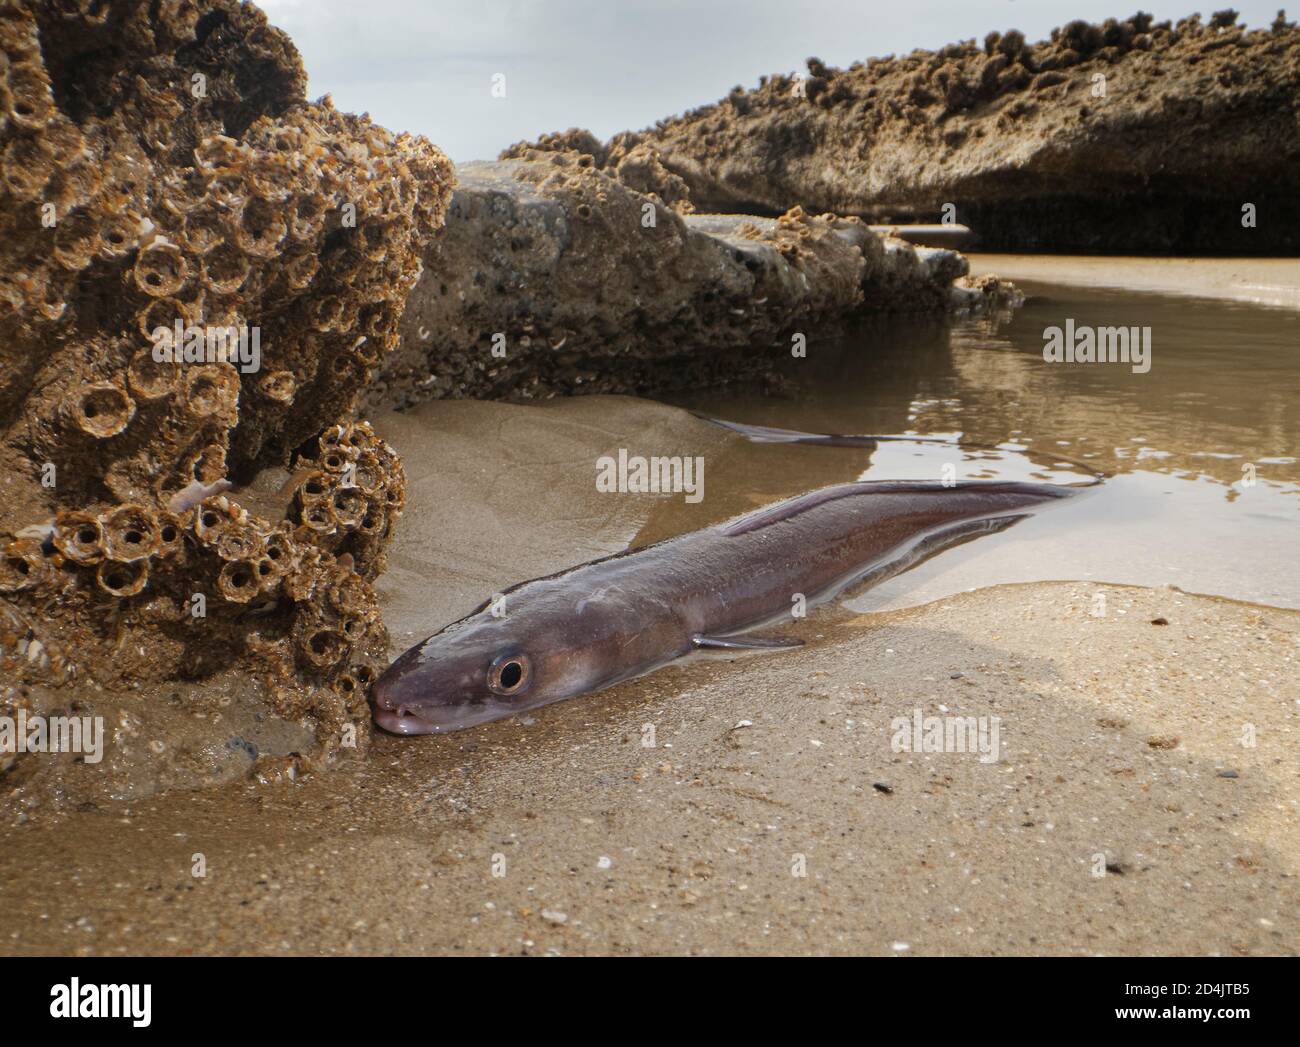 European eel (Anguilla anguilla) adult migratory “silver eel” trapped in a tide pool on a sandy beach on a very low tide, South Wales, UK, September. Stock Photo